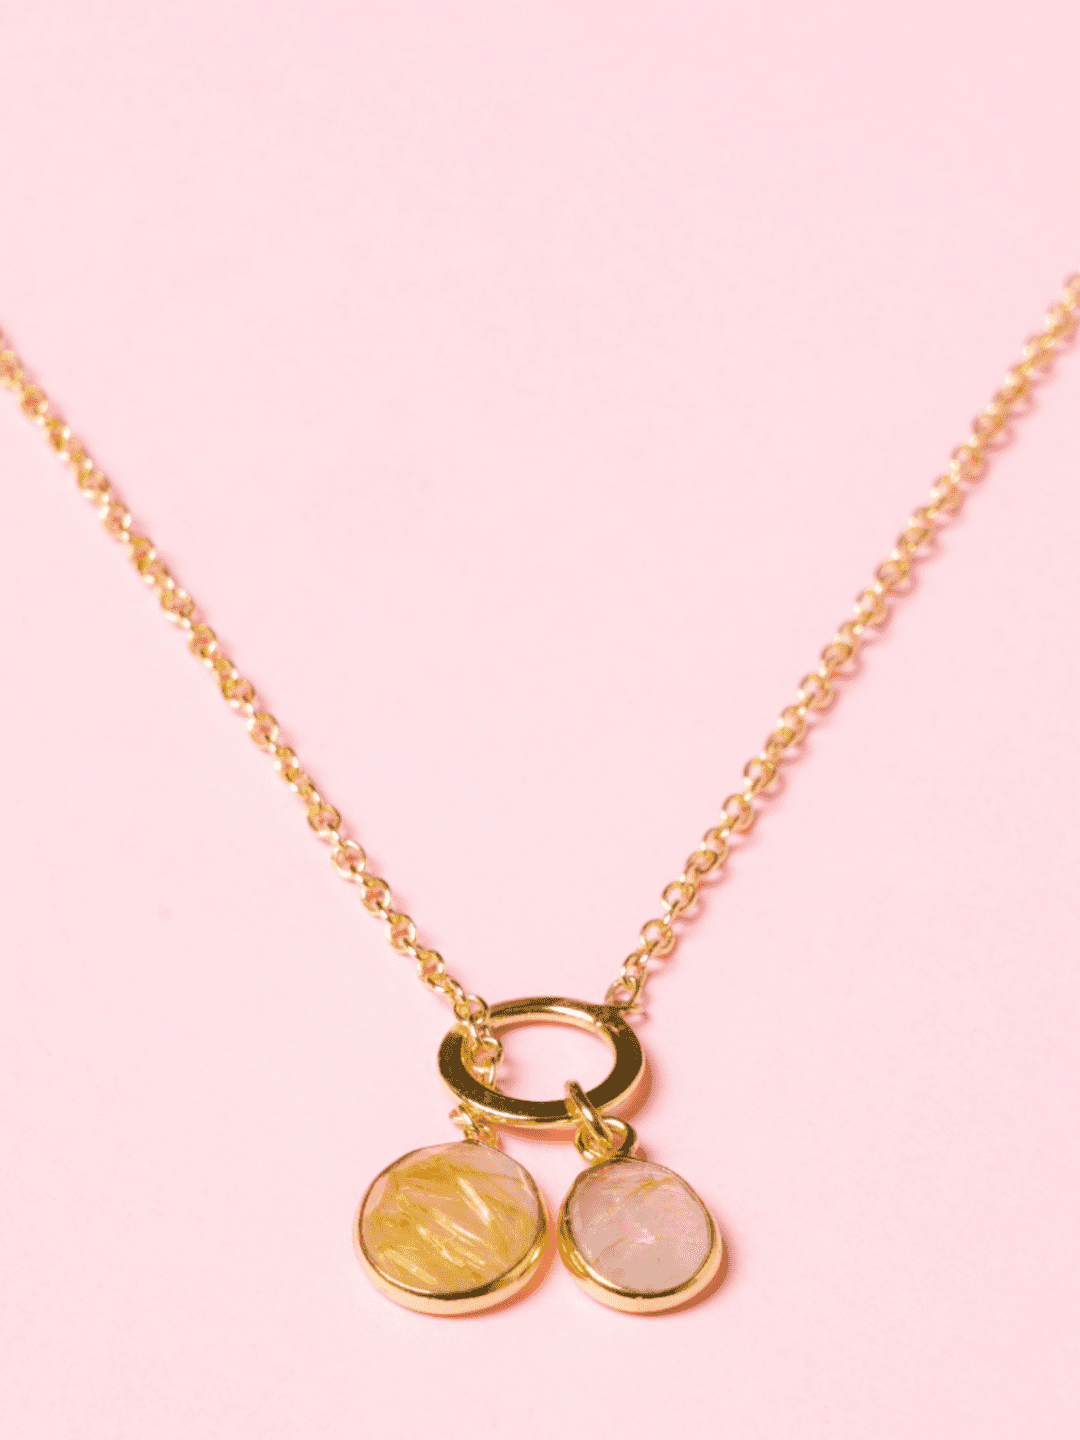 Dual rutile pendant necklace with a gold plated chain